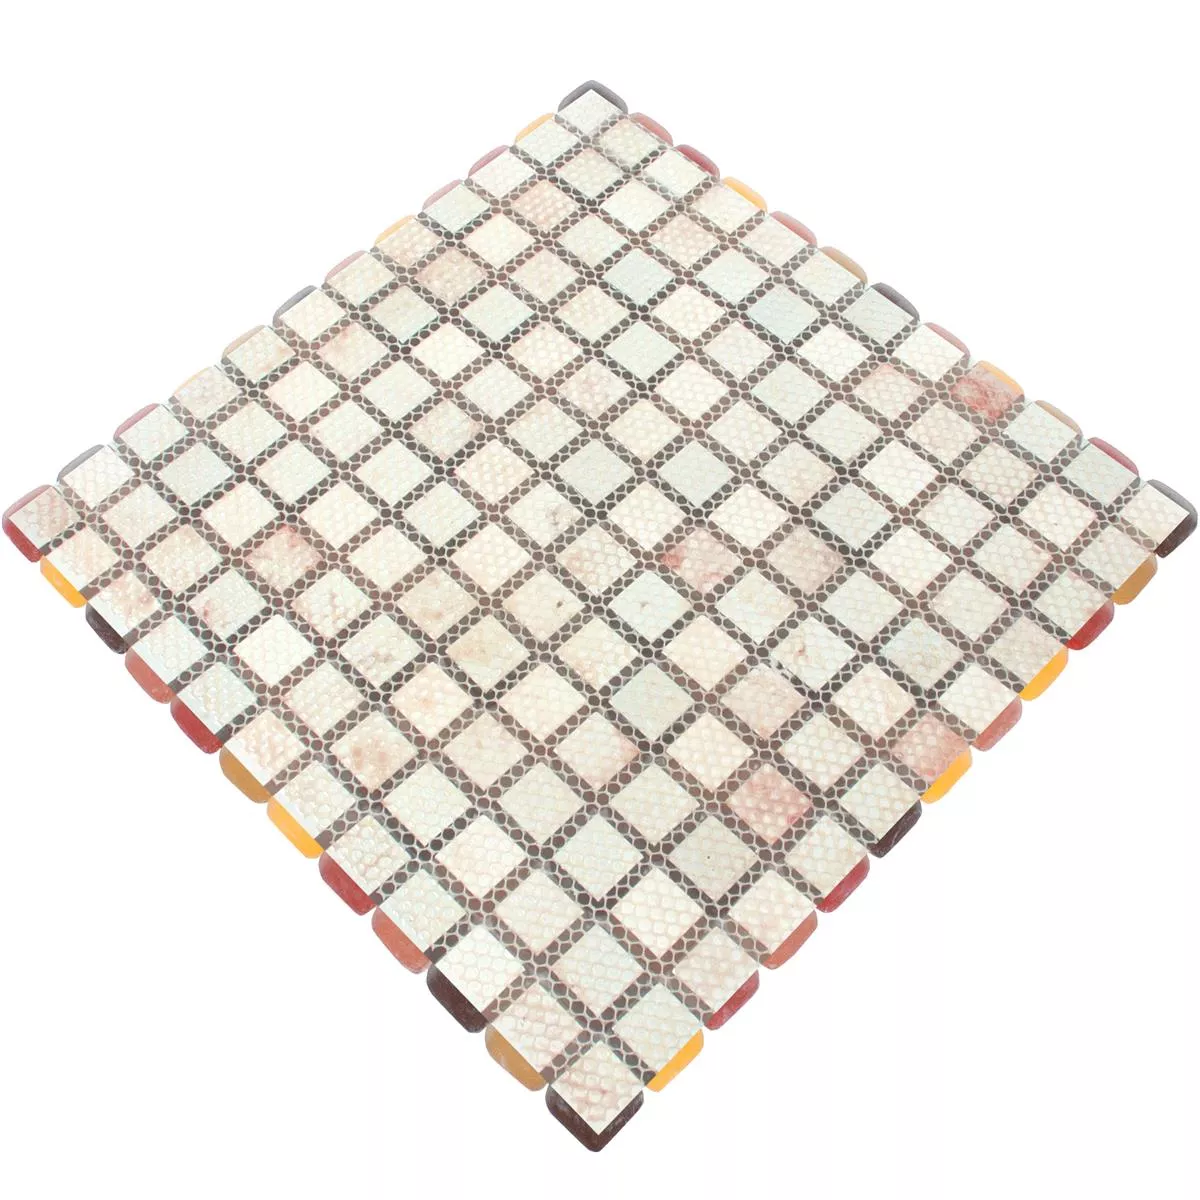 Sample Glass Mosaic Tiles Ponterio Frosted Red Mix